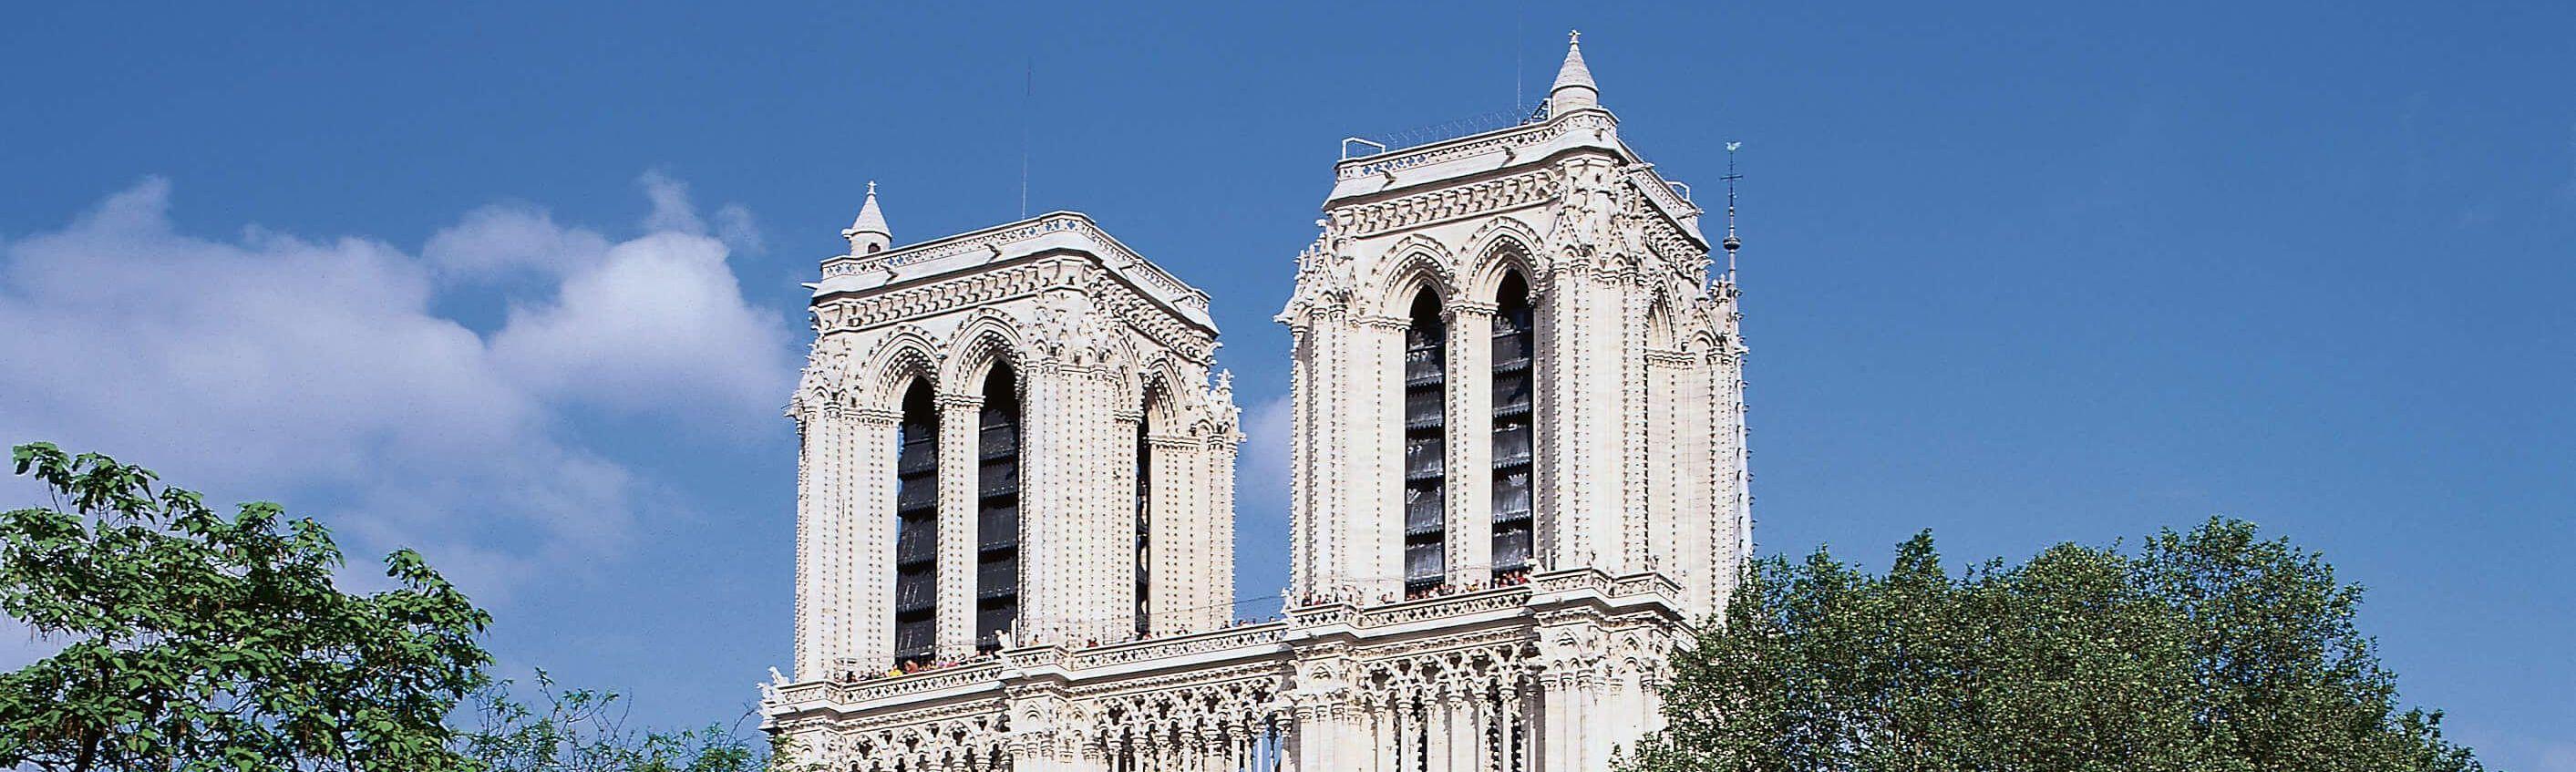 Notre Dame Cathedral image